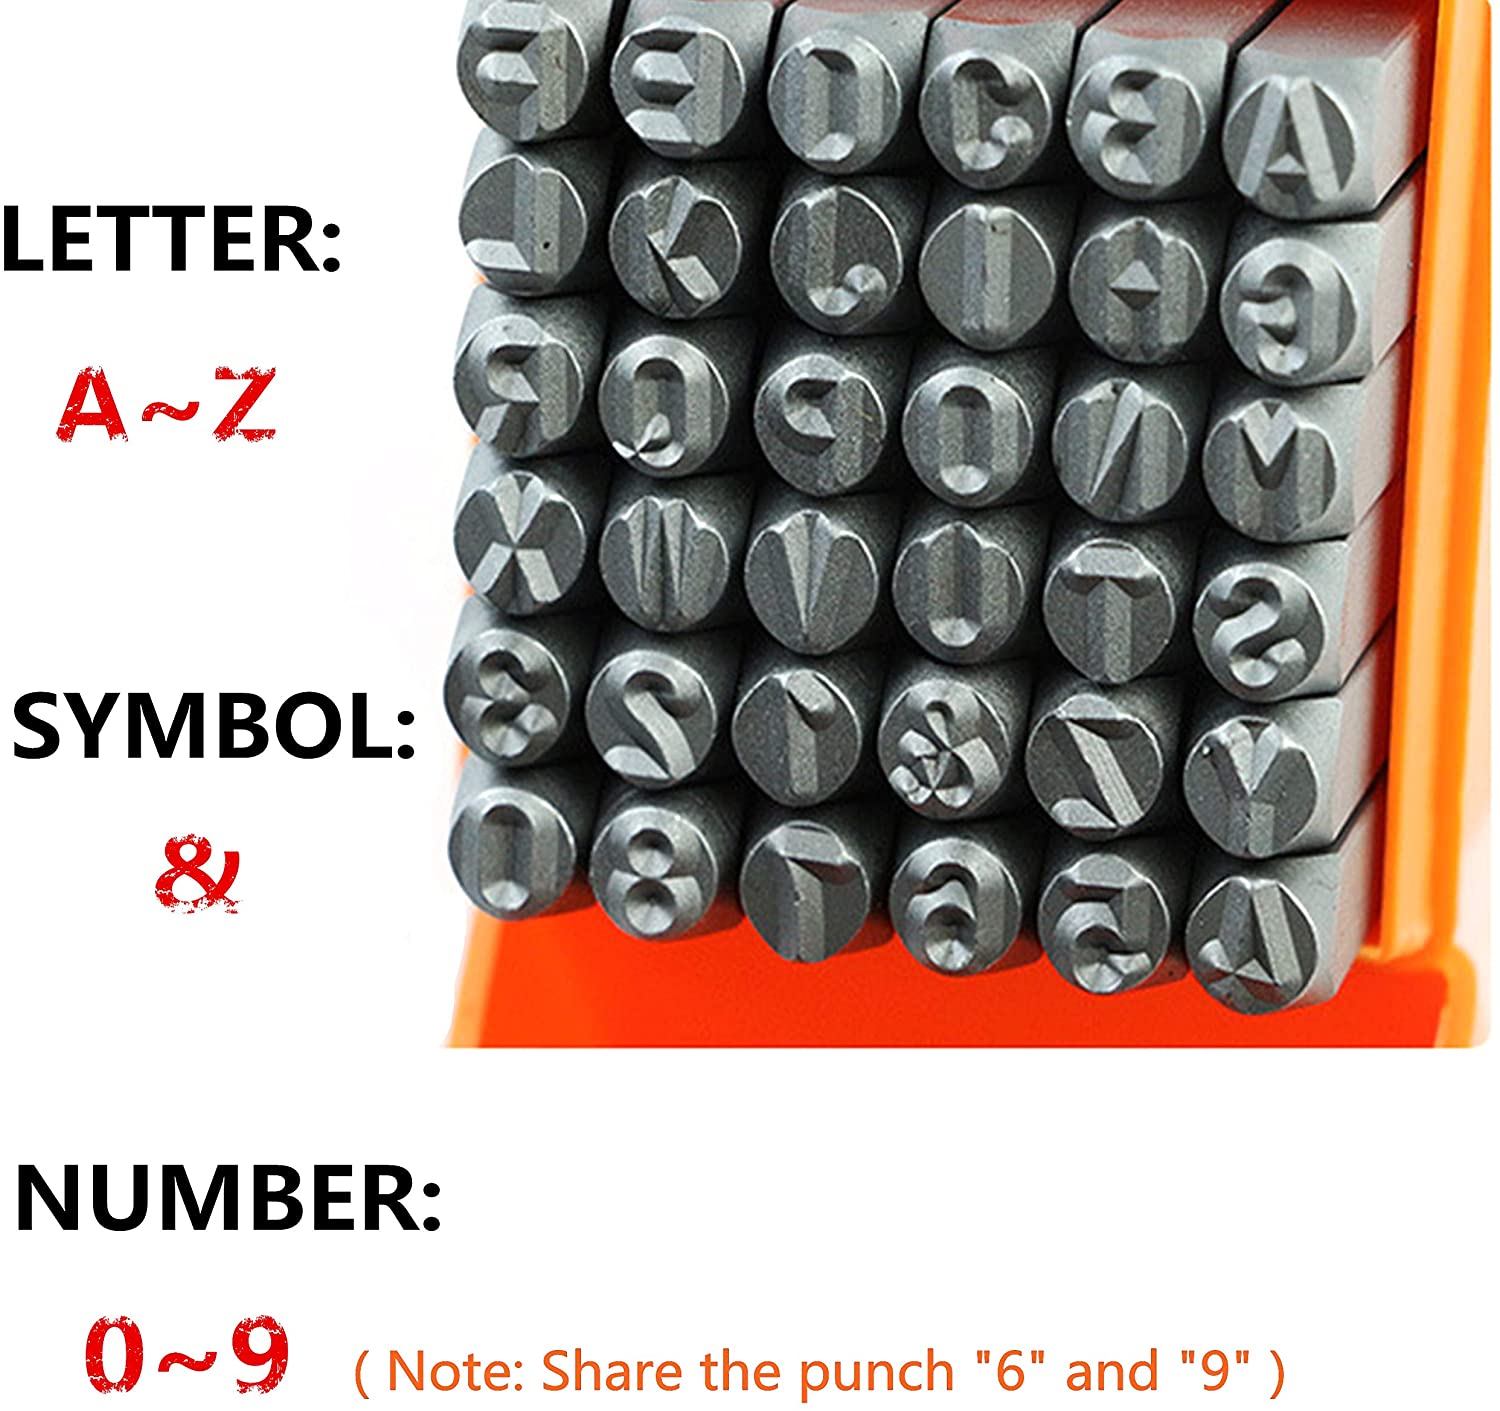 36pc Number & Letter Punch Set Alpha Numeric Carbon Steel Punches Craft 